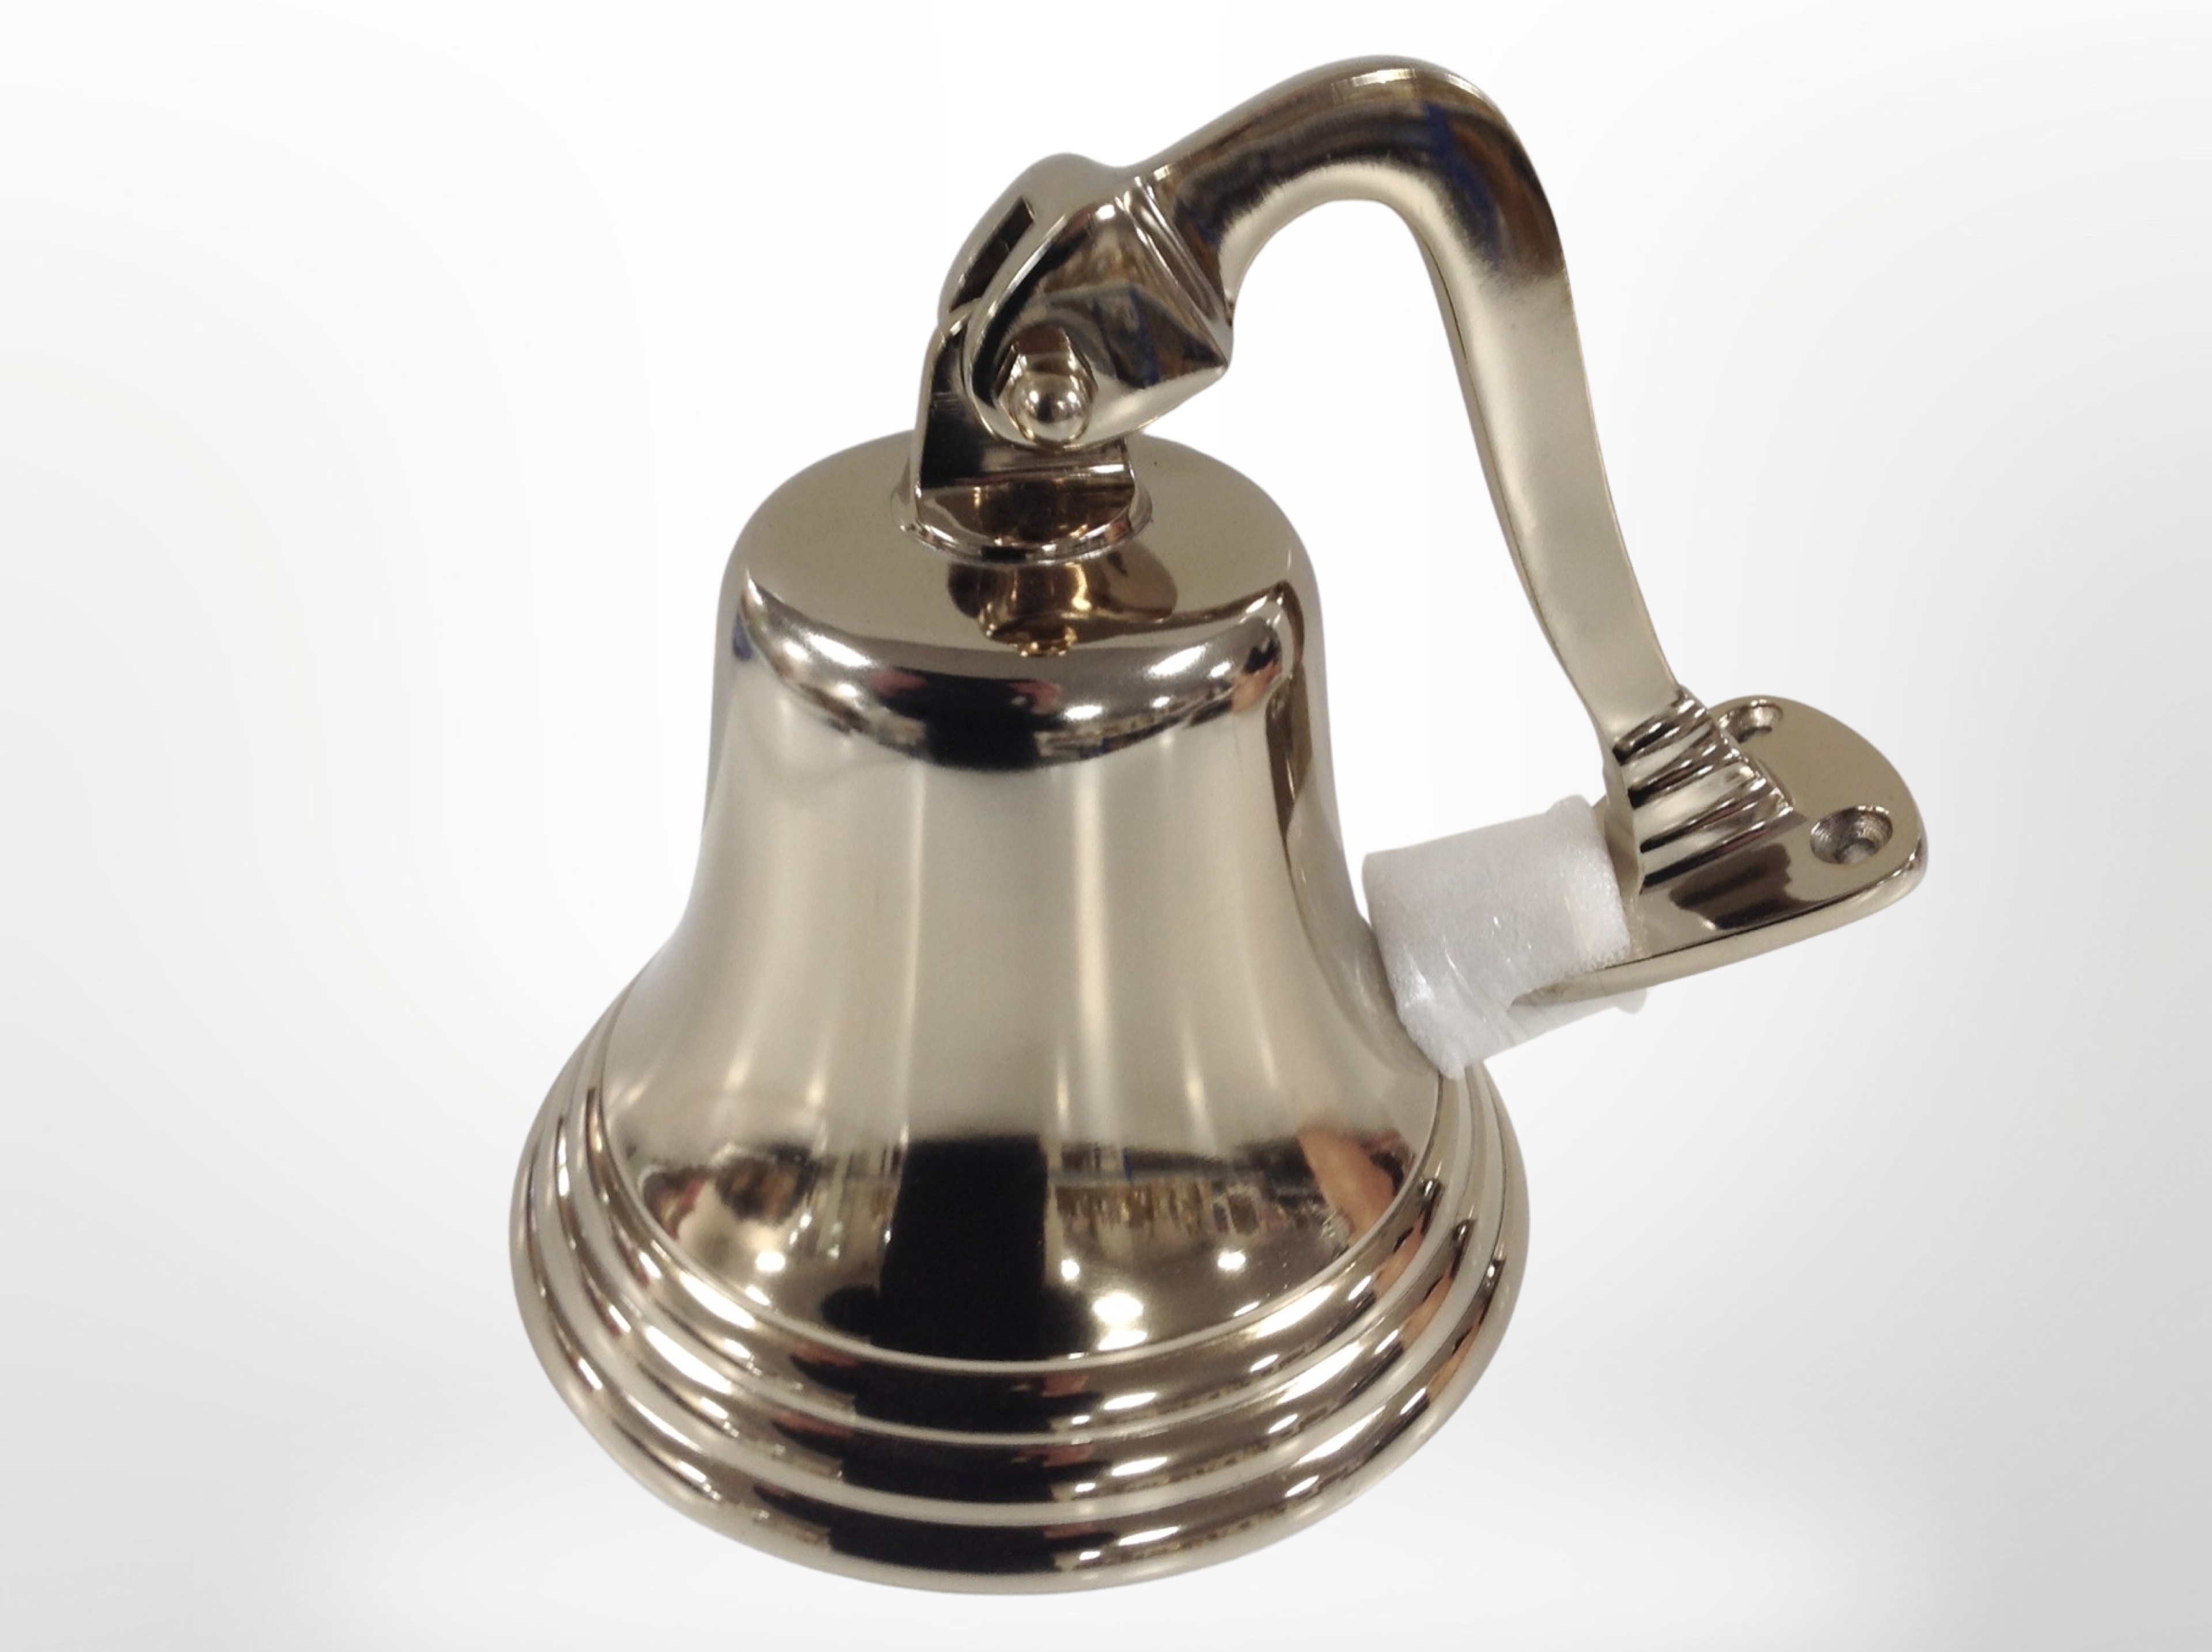 A ship's-style bell in brass finish, height 16cm.